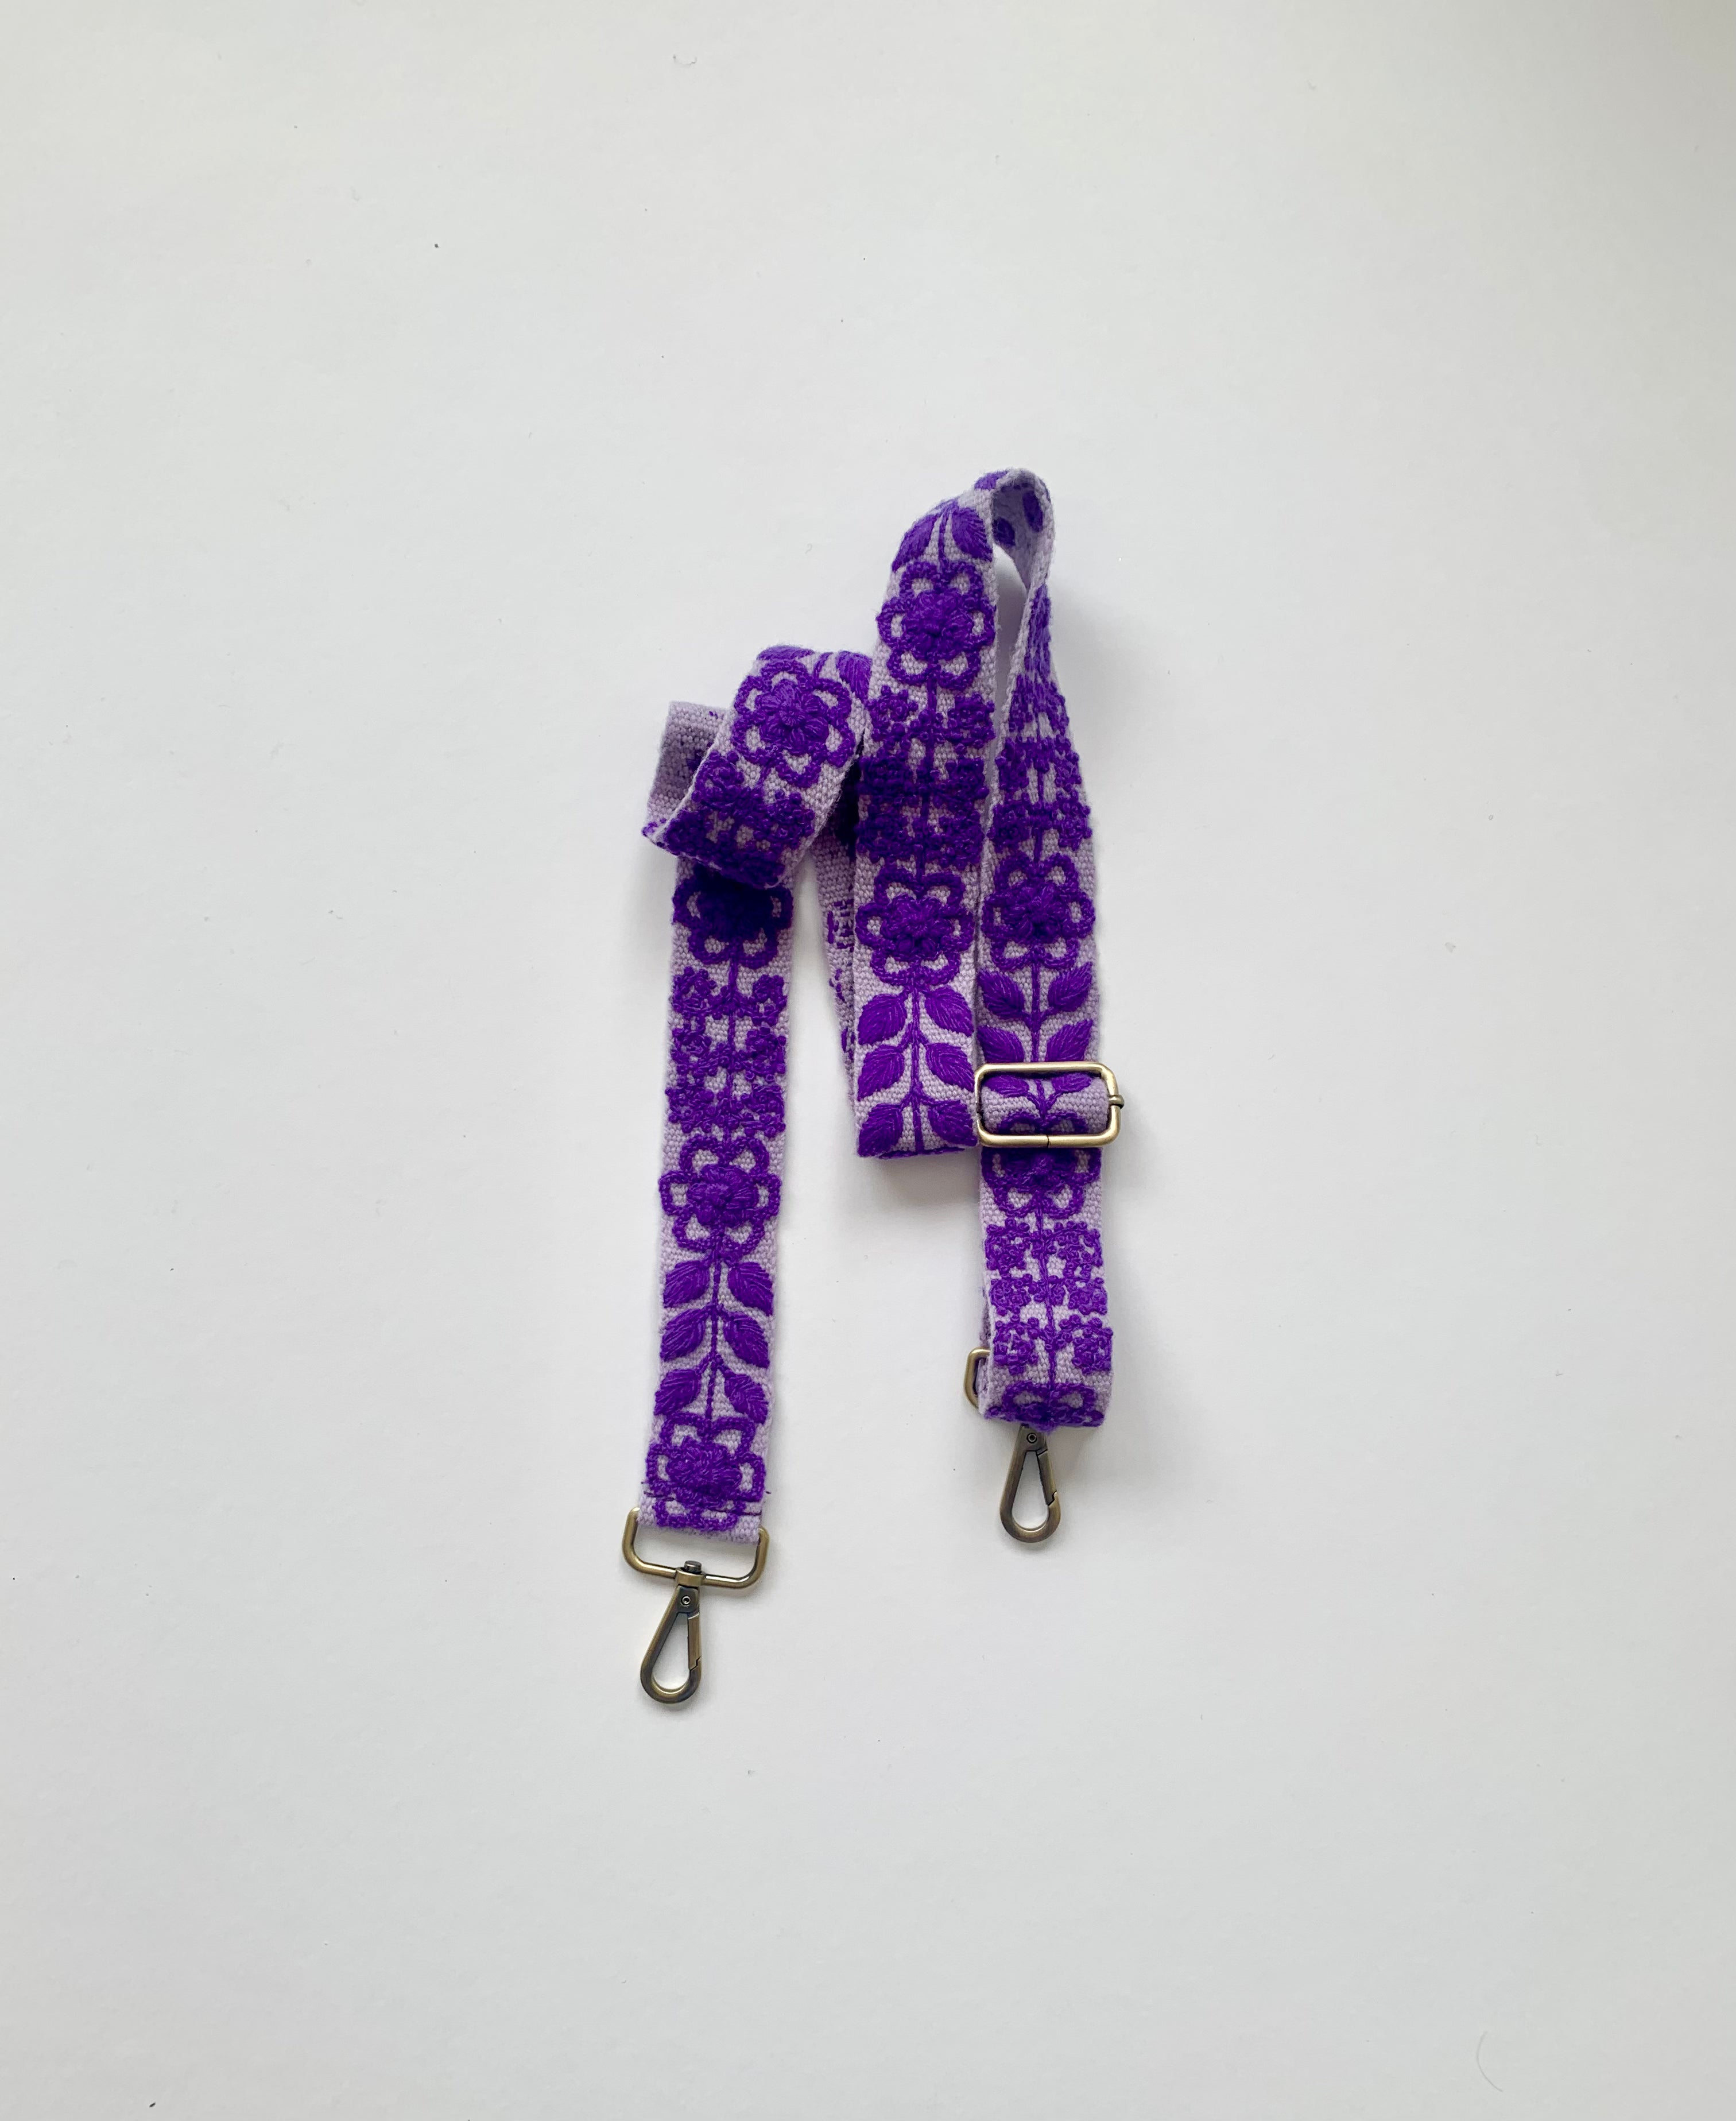 Eliza Adjustable Purse Strap, a purple strap with metal clasps and a floral design. 